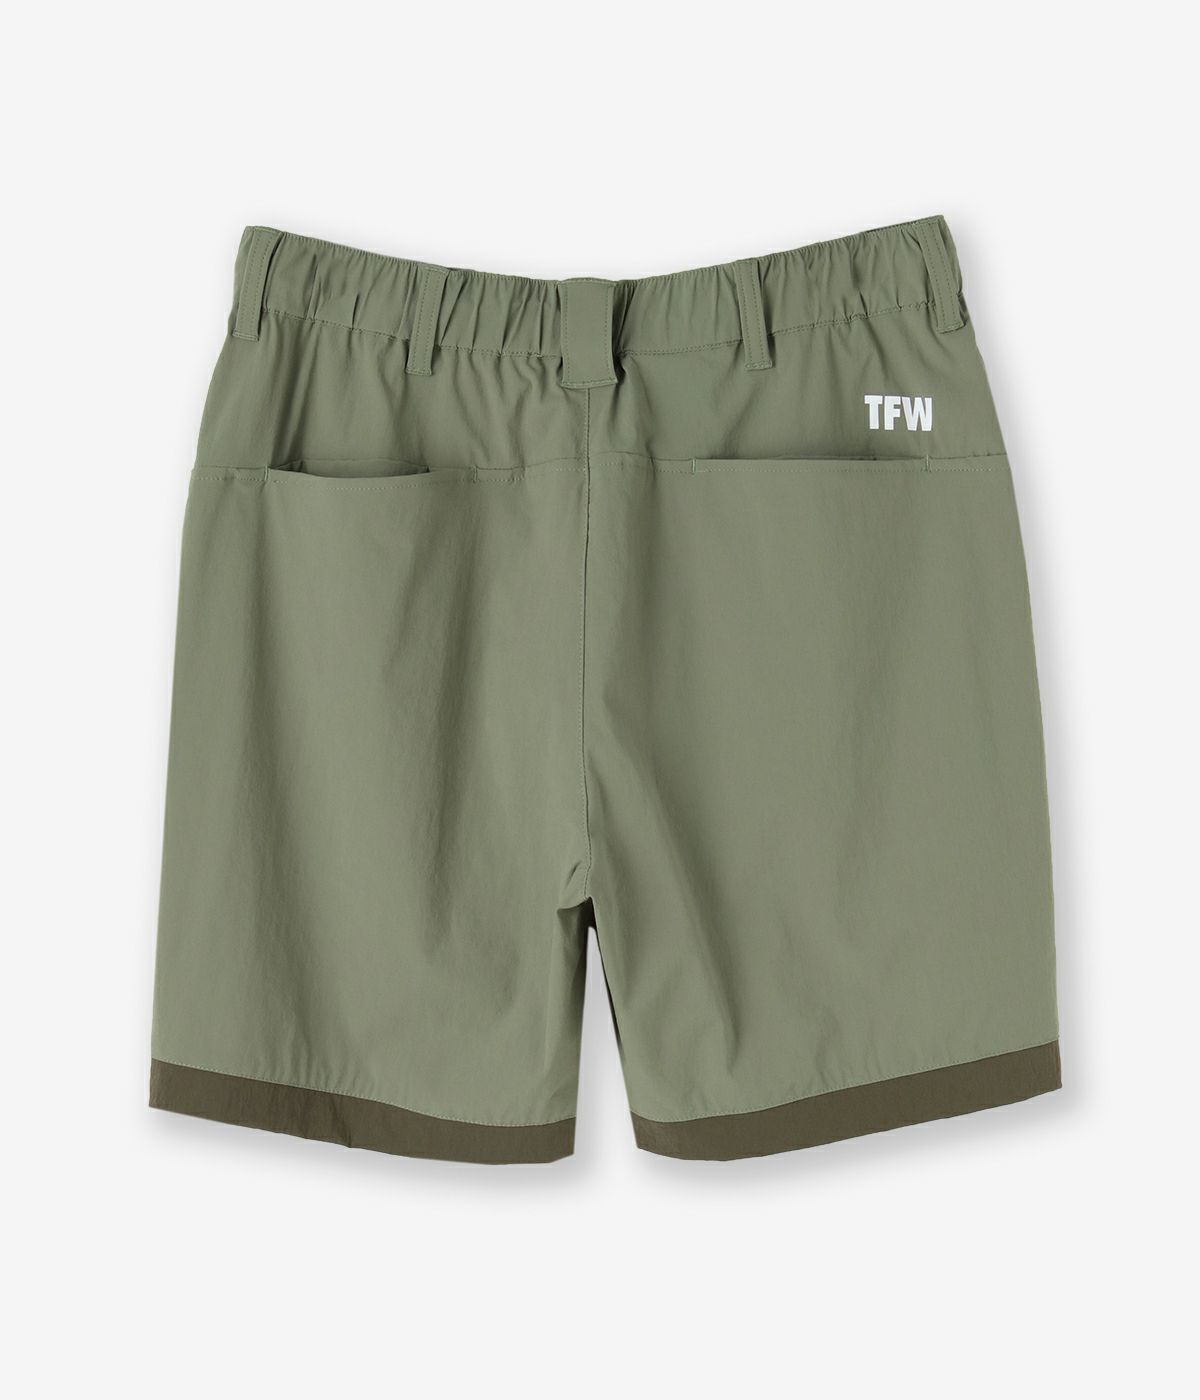 PACKABLE SHORTS TFW49 OUTDOOR LINE - パンツ